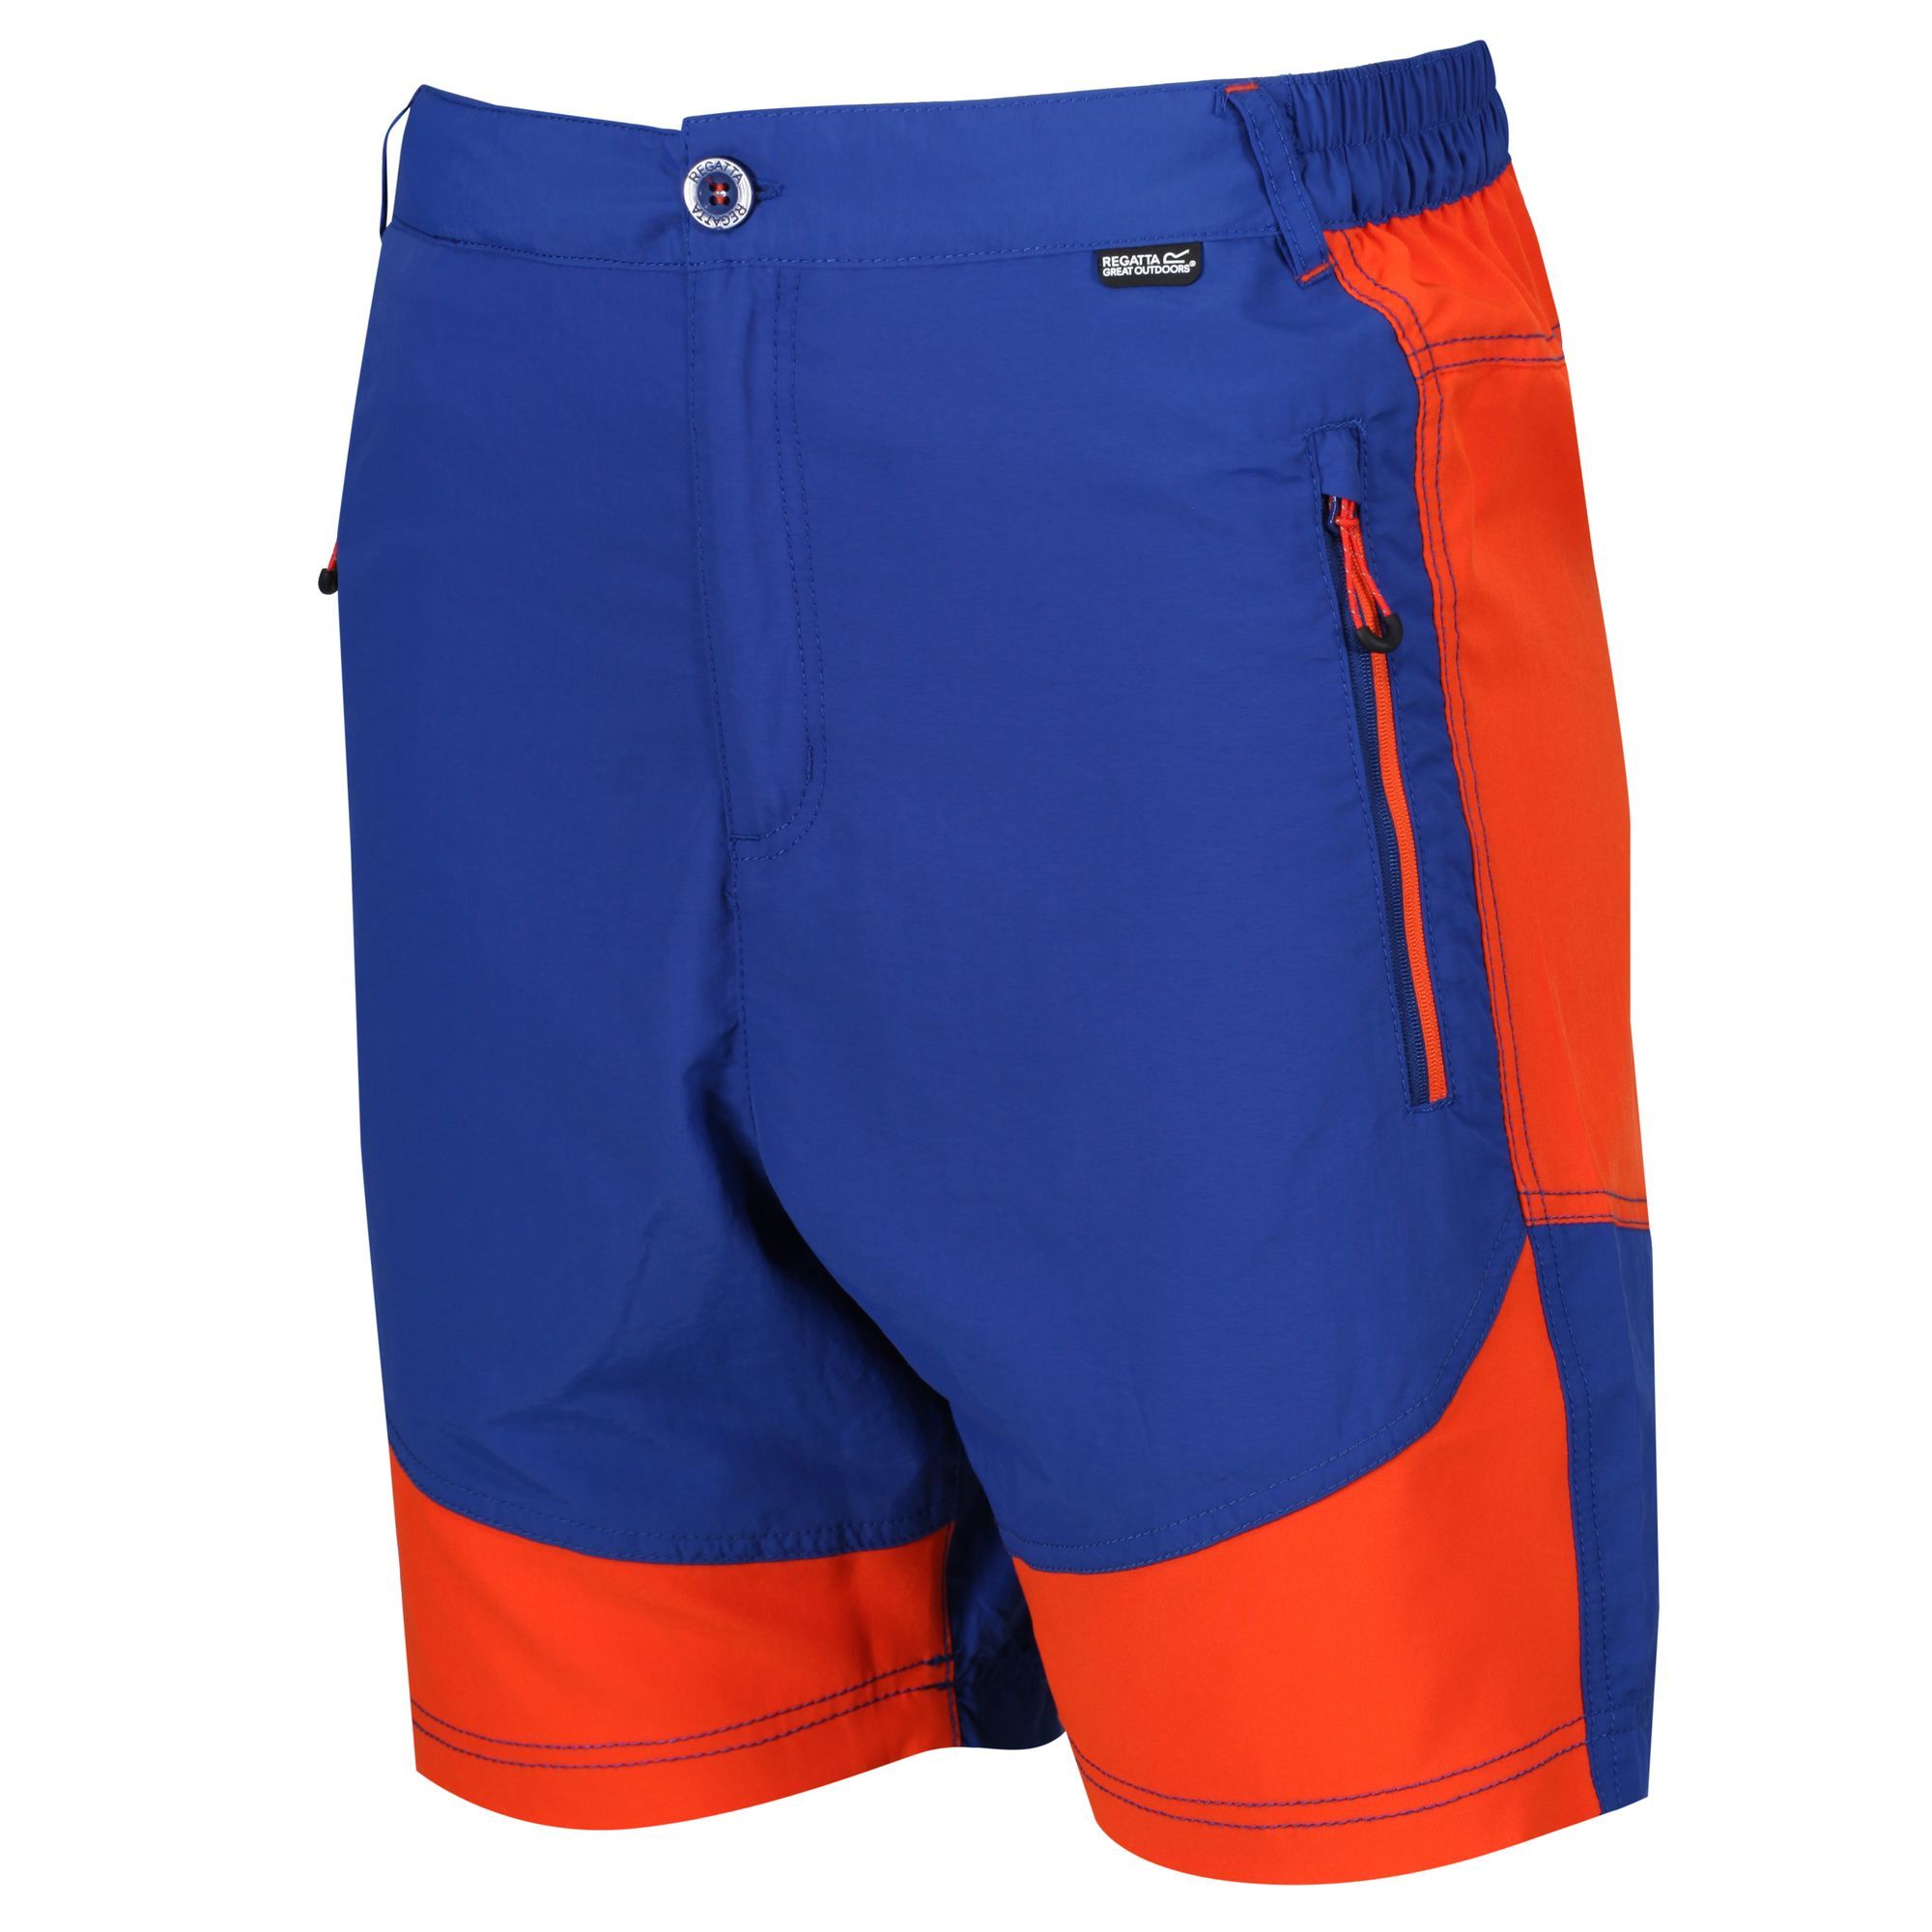 Lightweight shorts made from quick drying stretch fabric for unrestricted movement. DWR water resistant finish. UPF40+ sun protection. Multiple pockets. 100% polyamide. Machine washable.